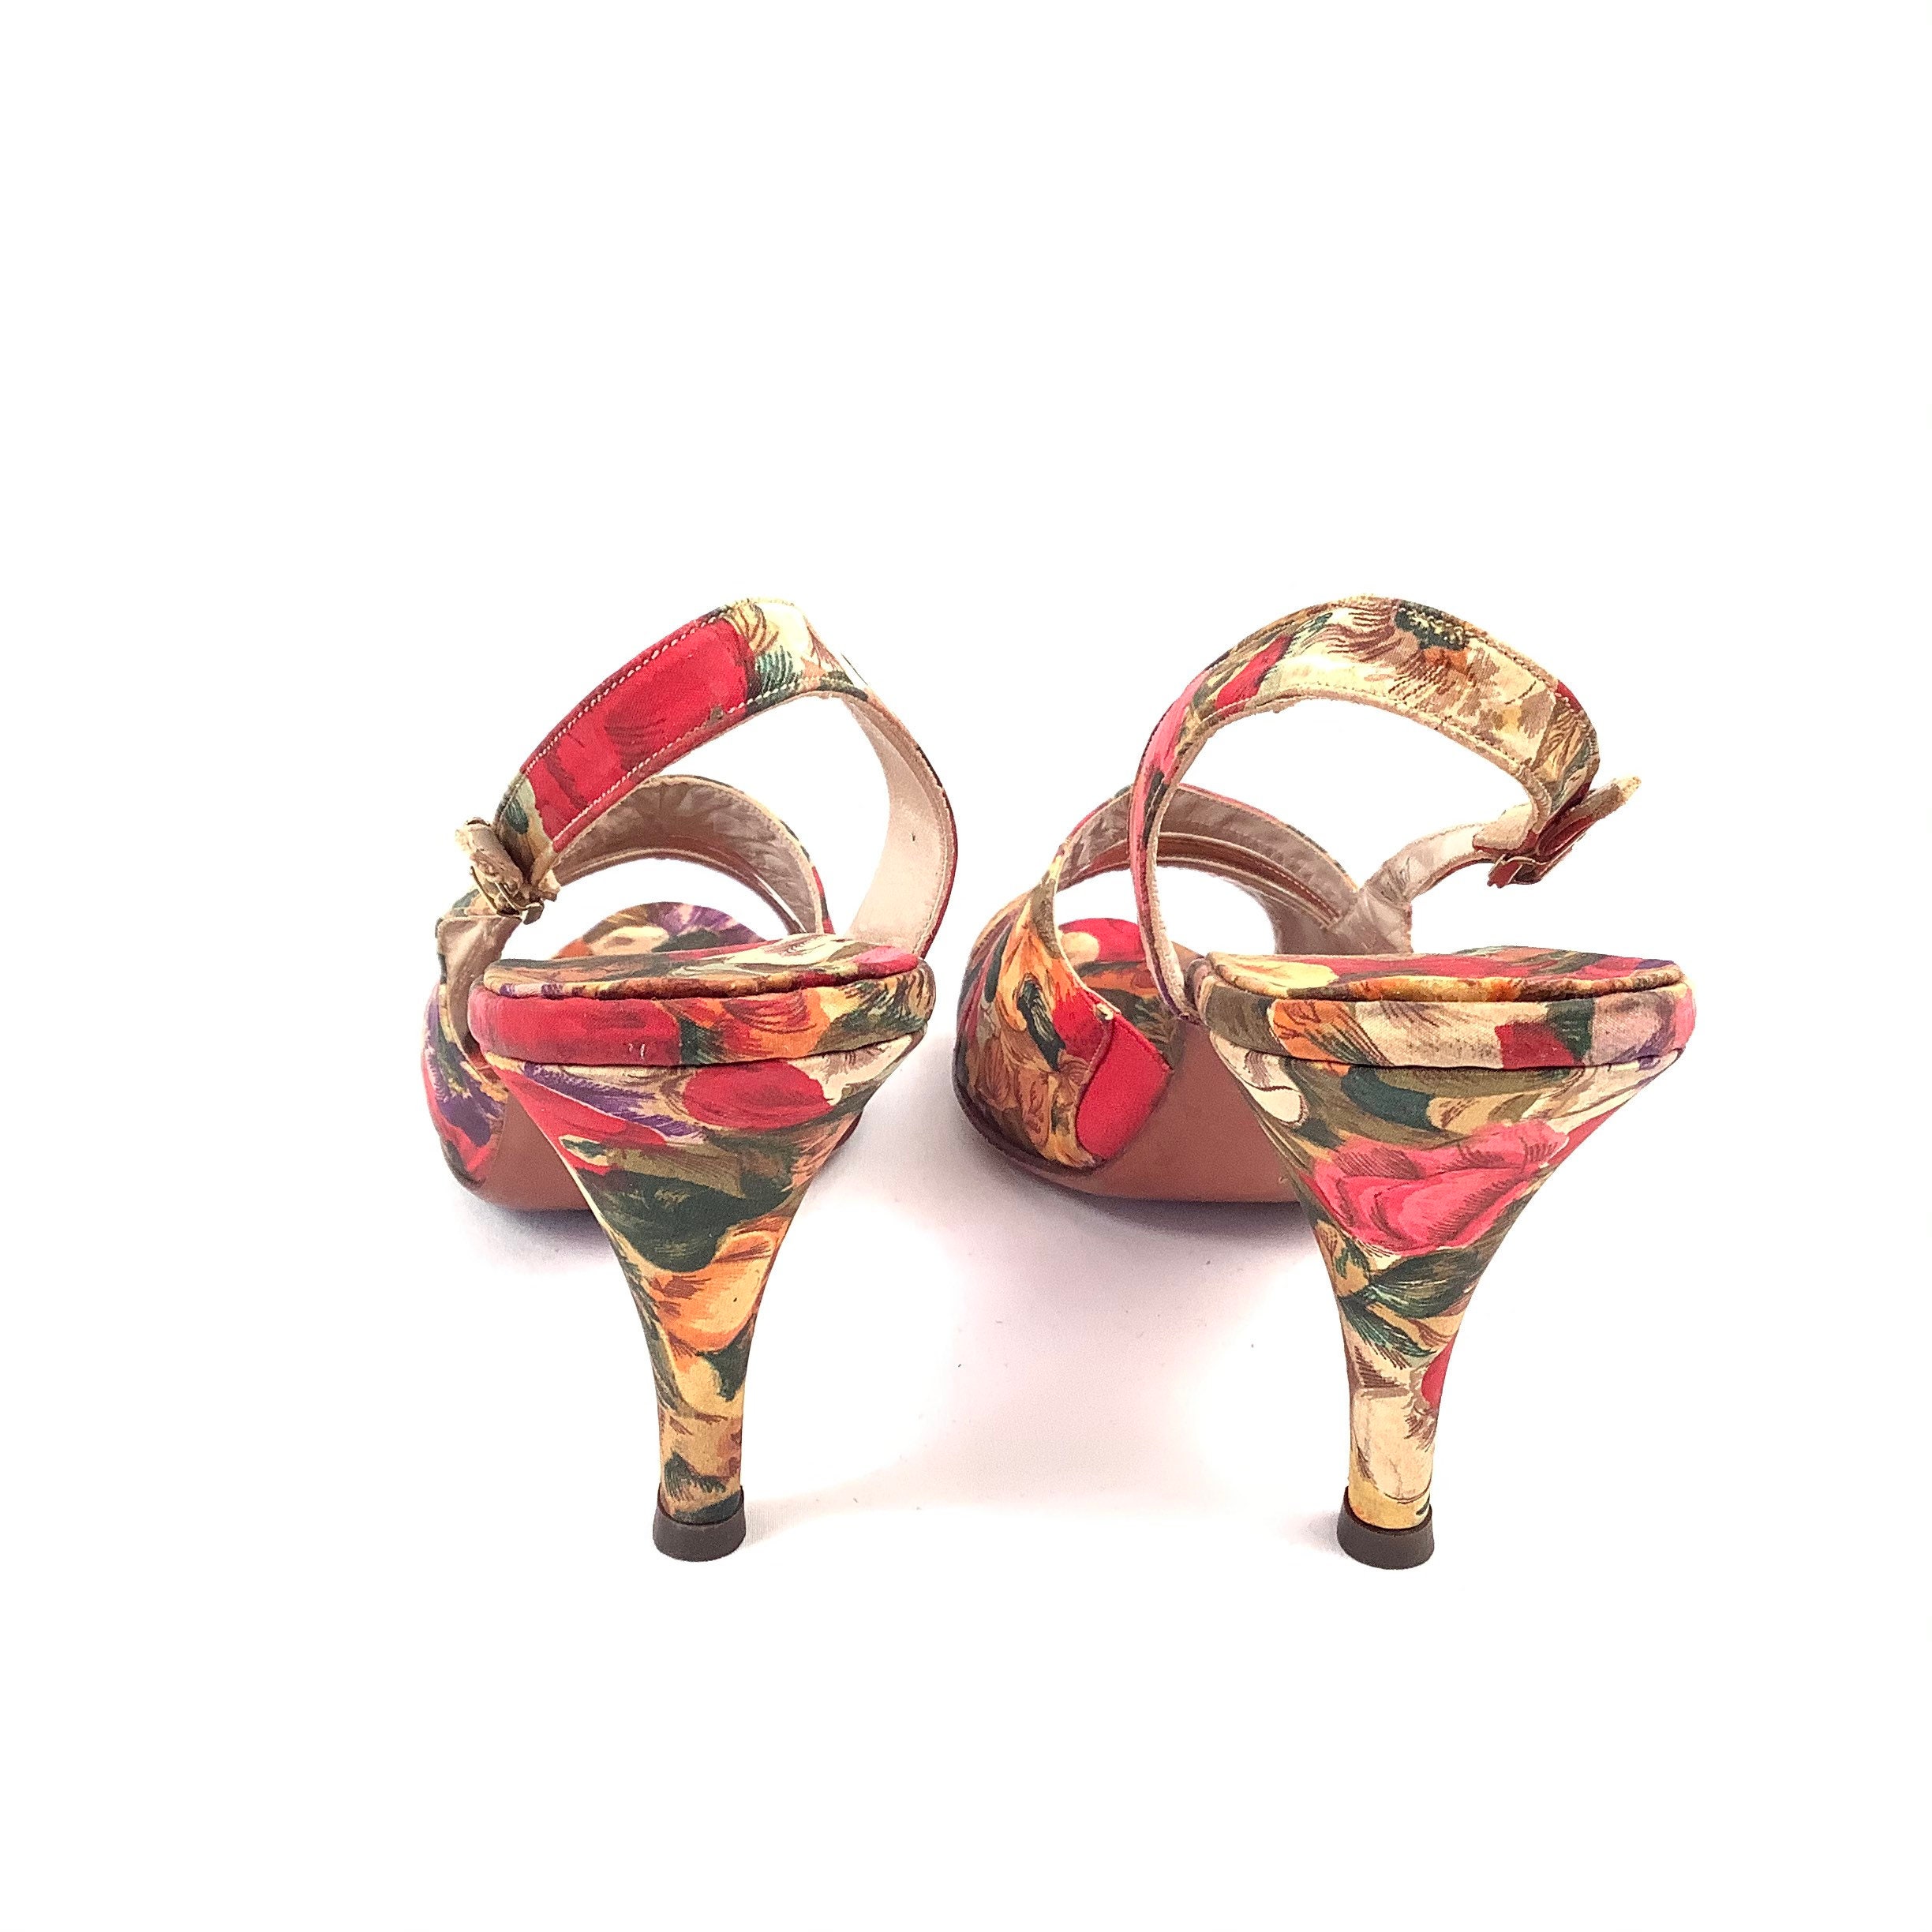 Handmade Floral Heels Shoes Sandals Strappy Amano Vintage Size - Etsy